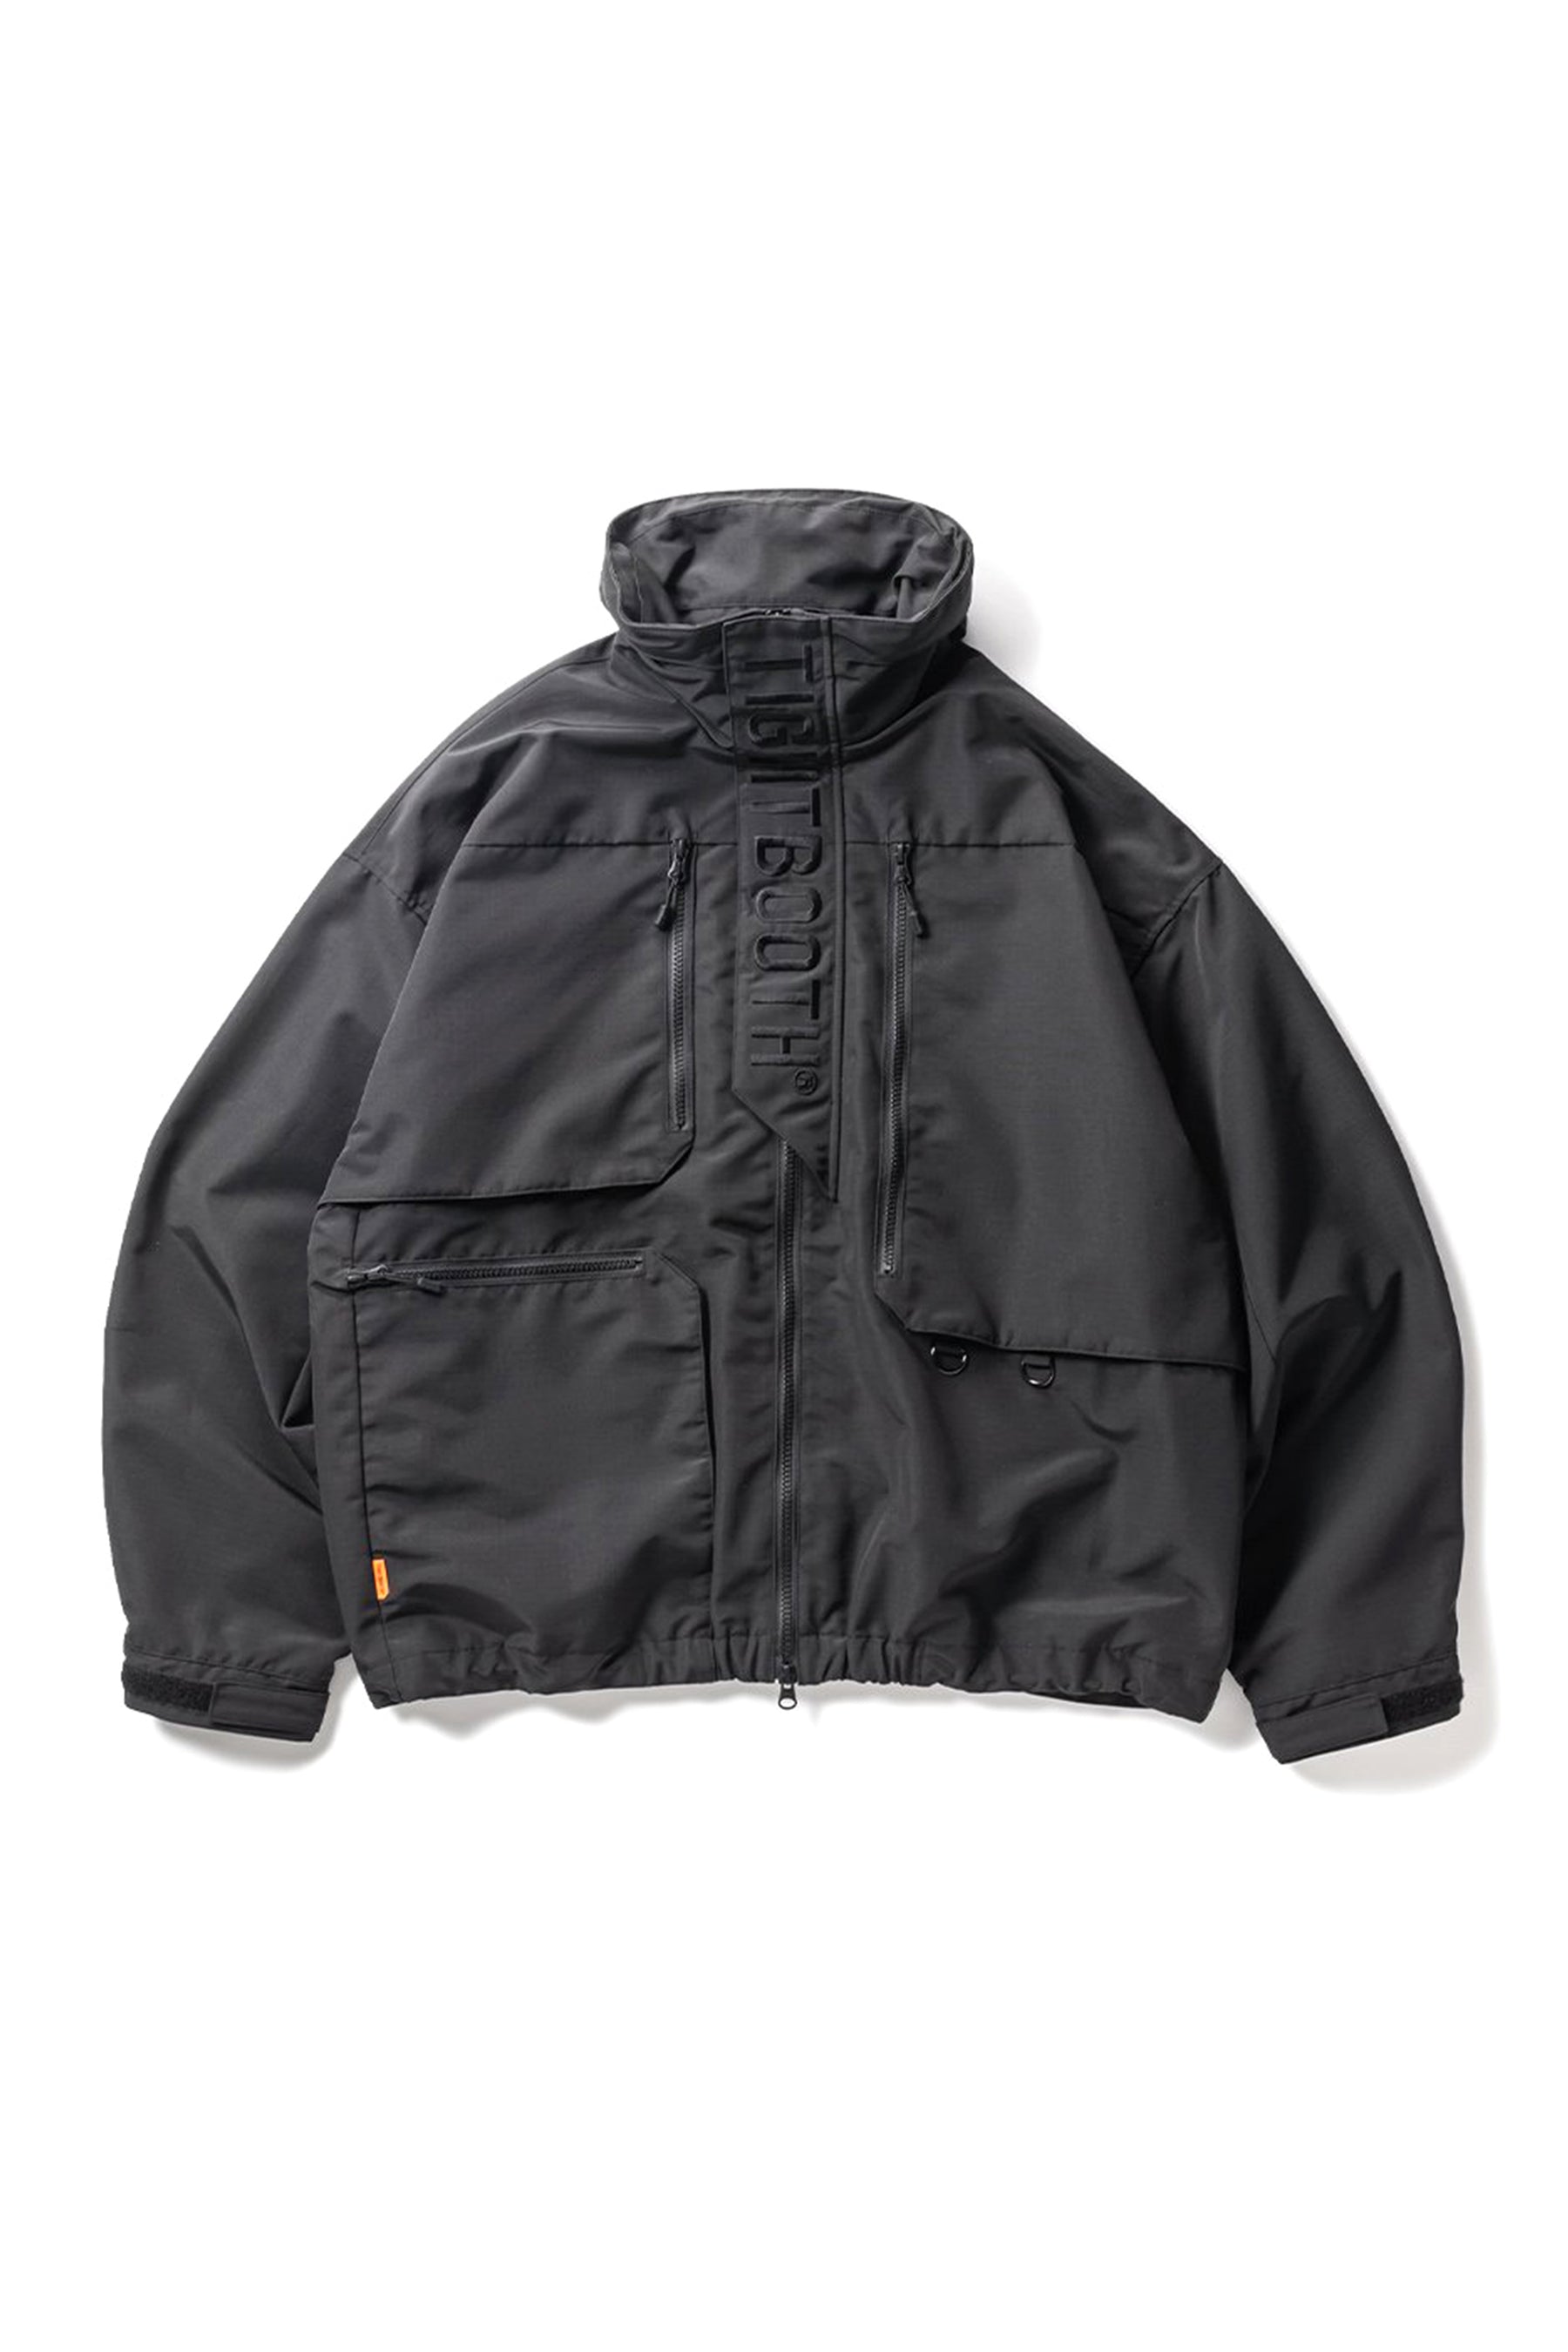 TIGHTBOOTH タイトブース SS24 RIPSTOP TACTICAL JKT / BLK - NUBIAN